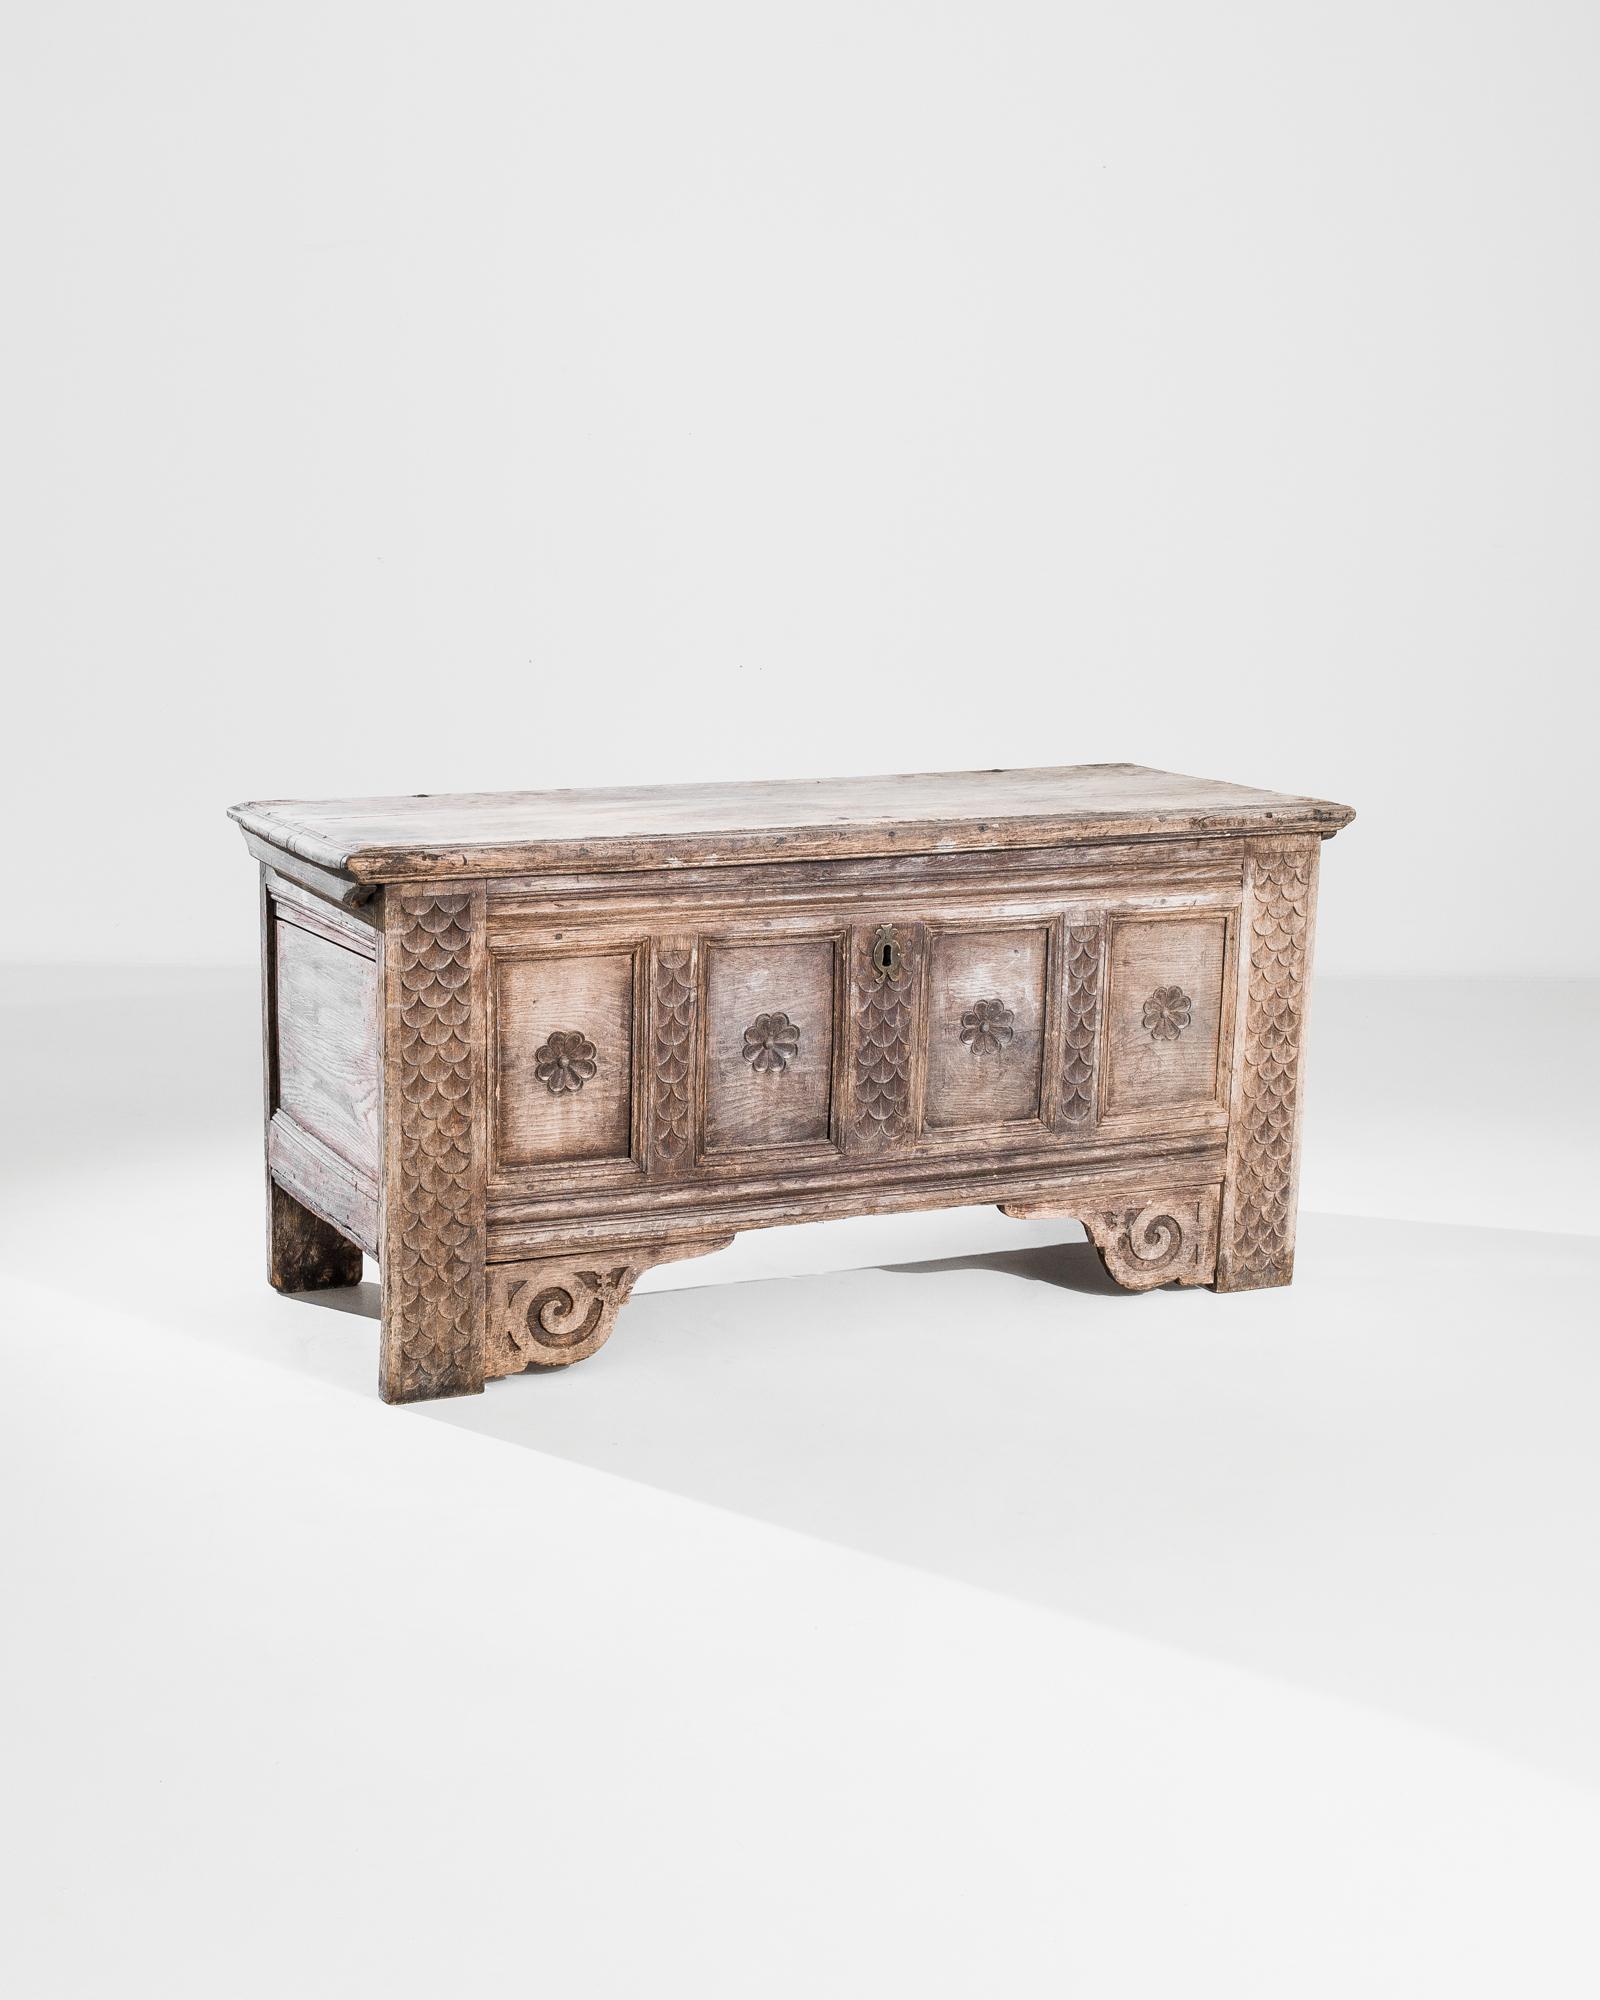 Made to safeguard your precious treasures, this impressive wooden chest made in Germany circa 1780. Elaborate ornamentation on the front includes diverse sea motifs such as a fish scale pattern on the sides and scrollwork molded underneath four